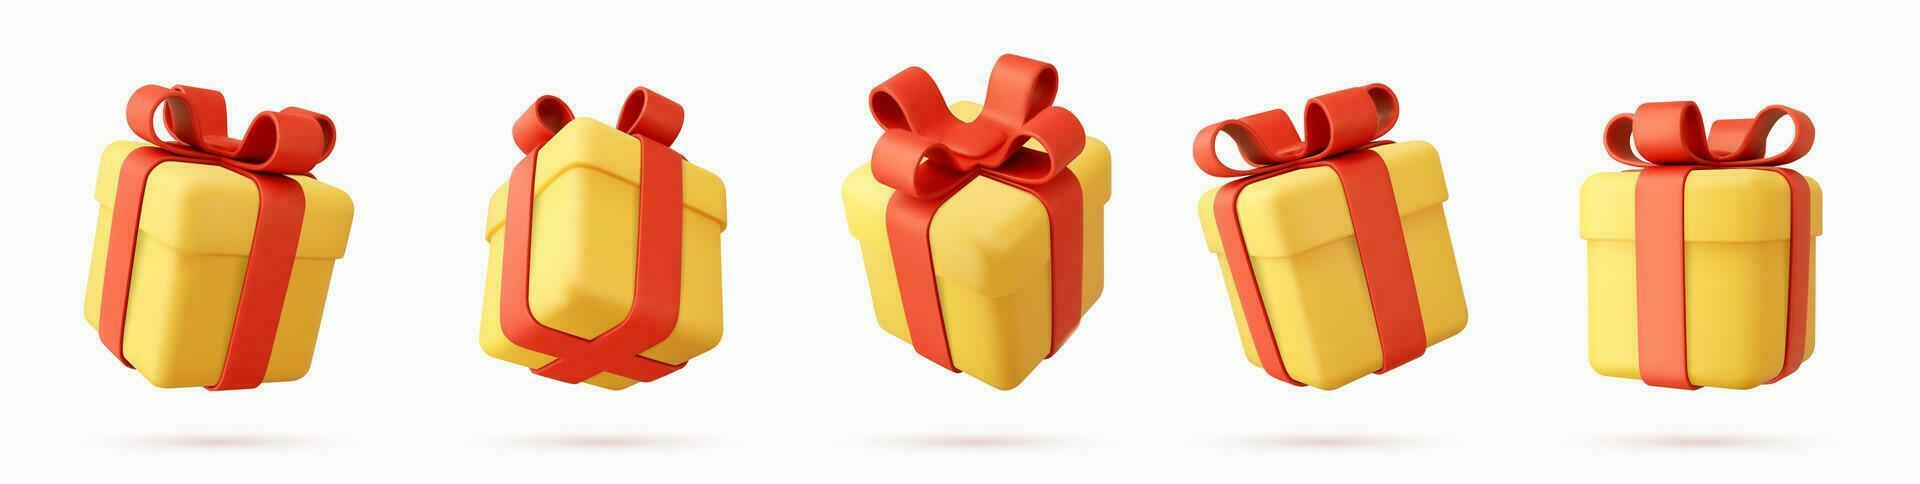 Set of 3d render christmas gifts box isolated on white background. Holiday decoration presents. Festive gift surprise. Realistic icon for birthday or wedding banners. Vector illustration.